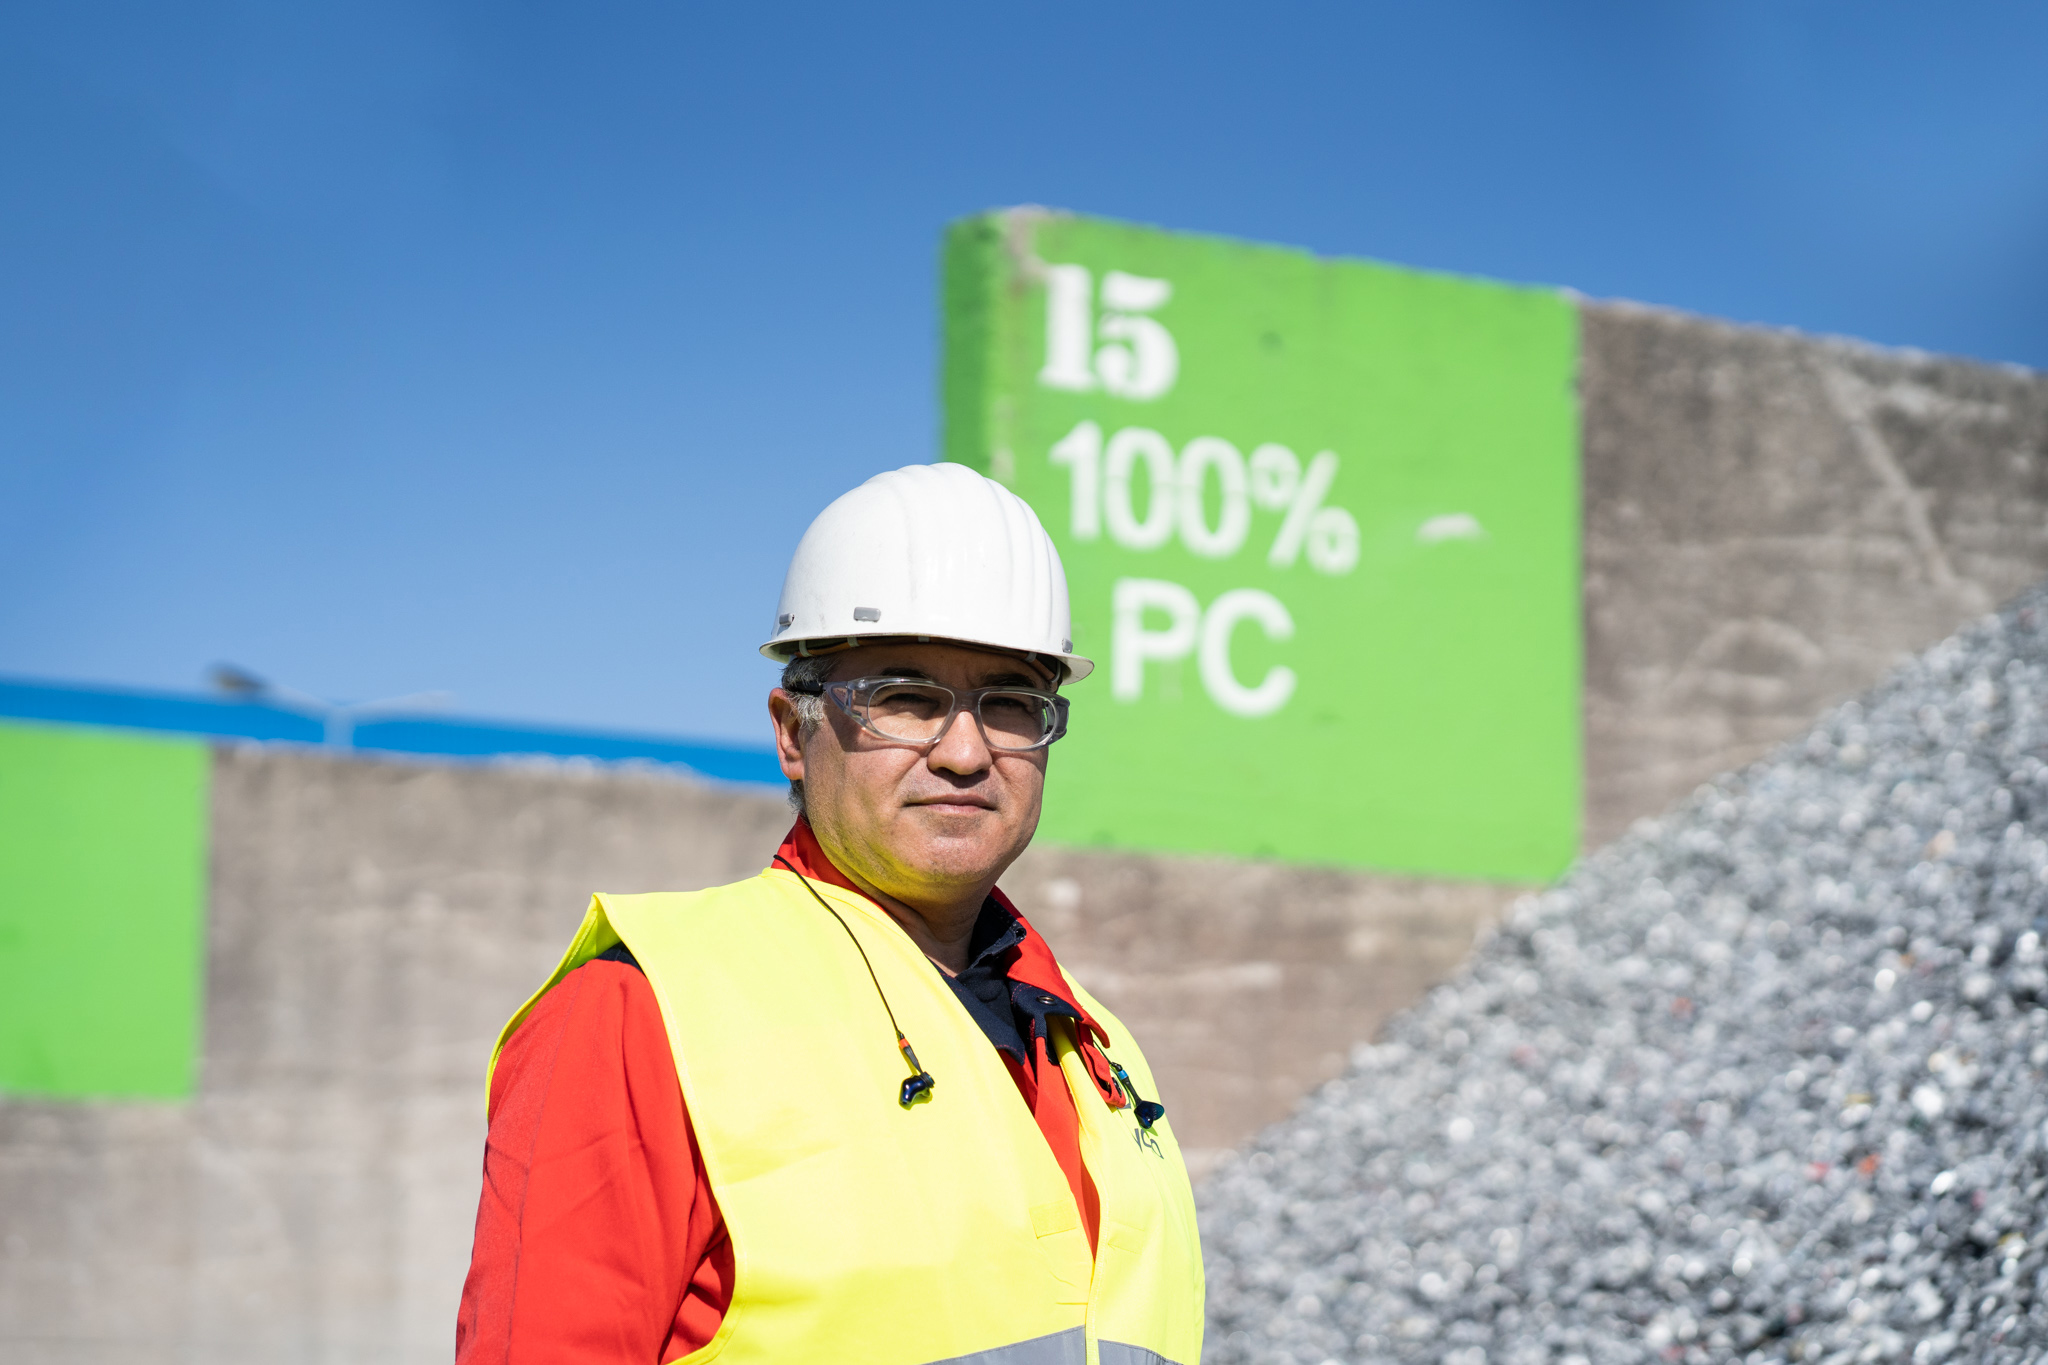 a man wearing a hard hat and glasses standing in front of a sign